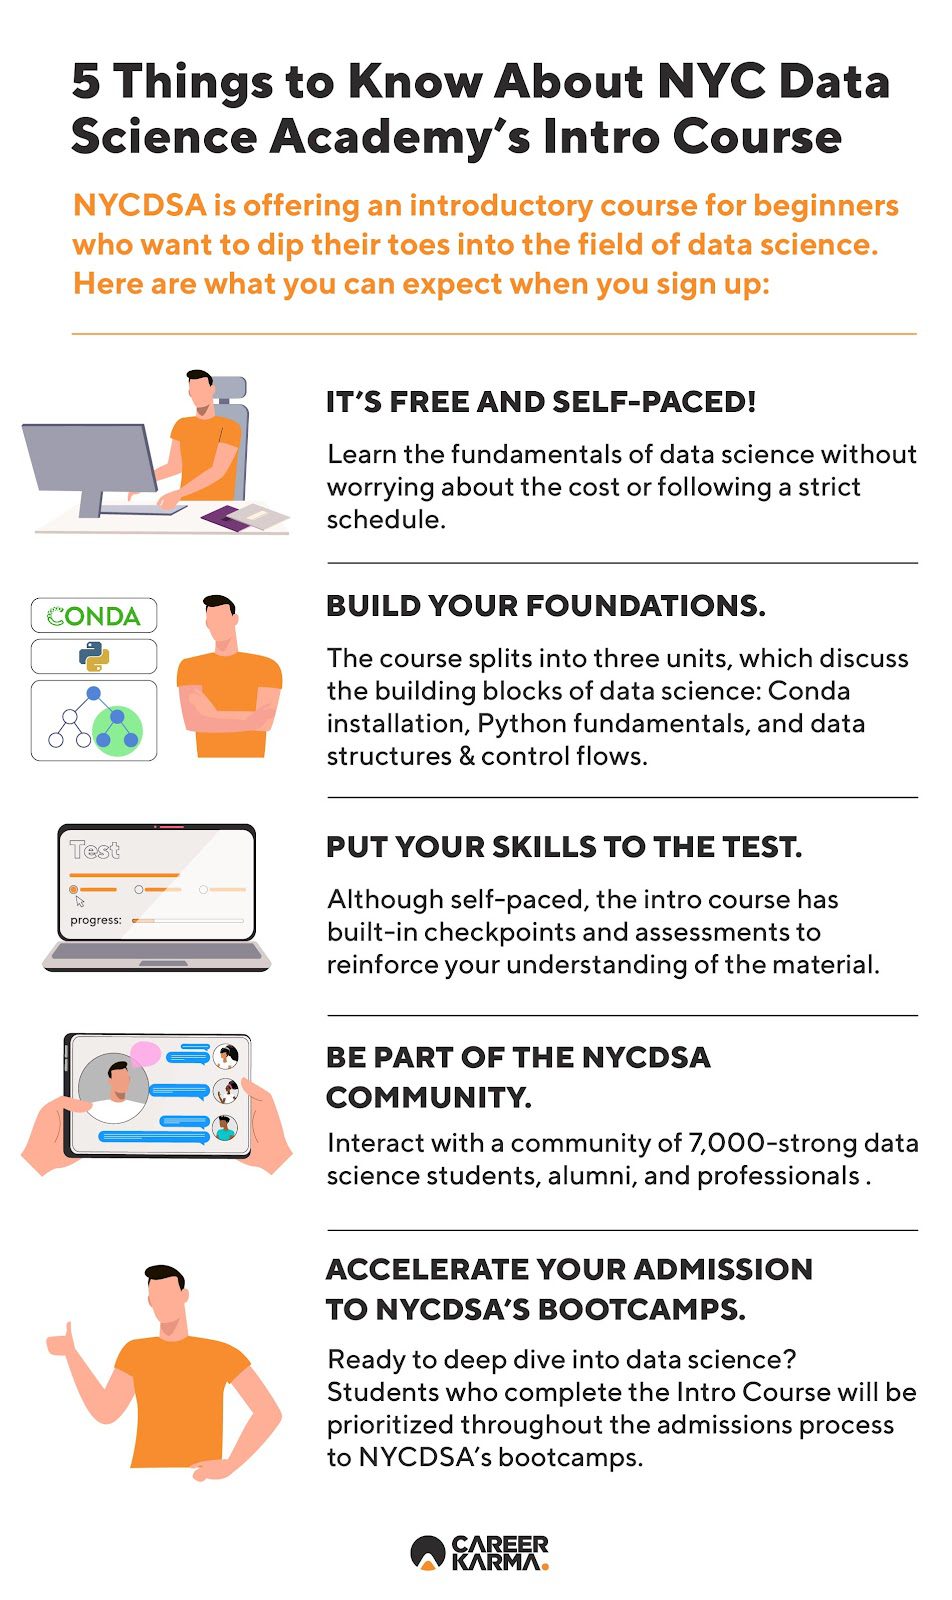 An infographic highlighting key features of NYCDSA’s Intro Course to Data Science